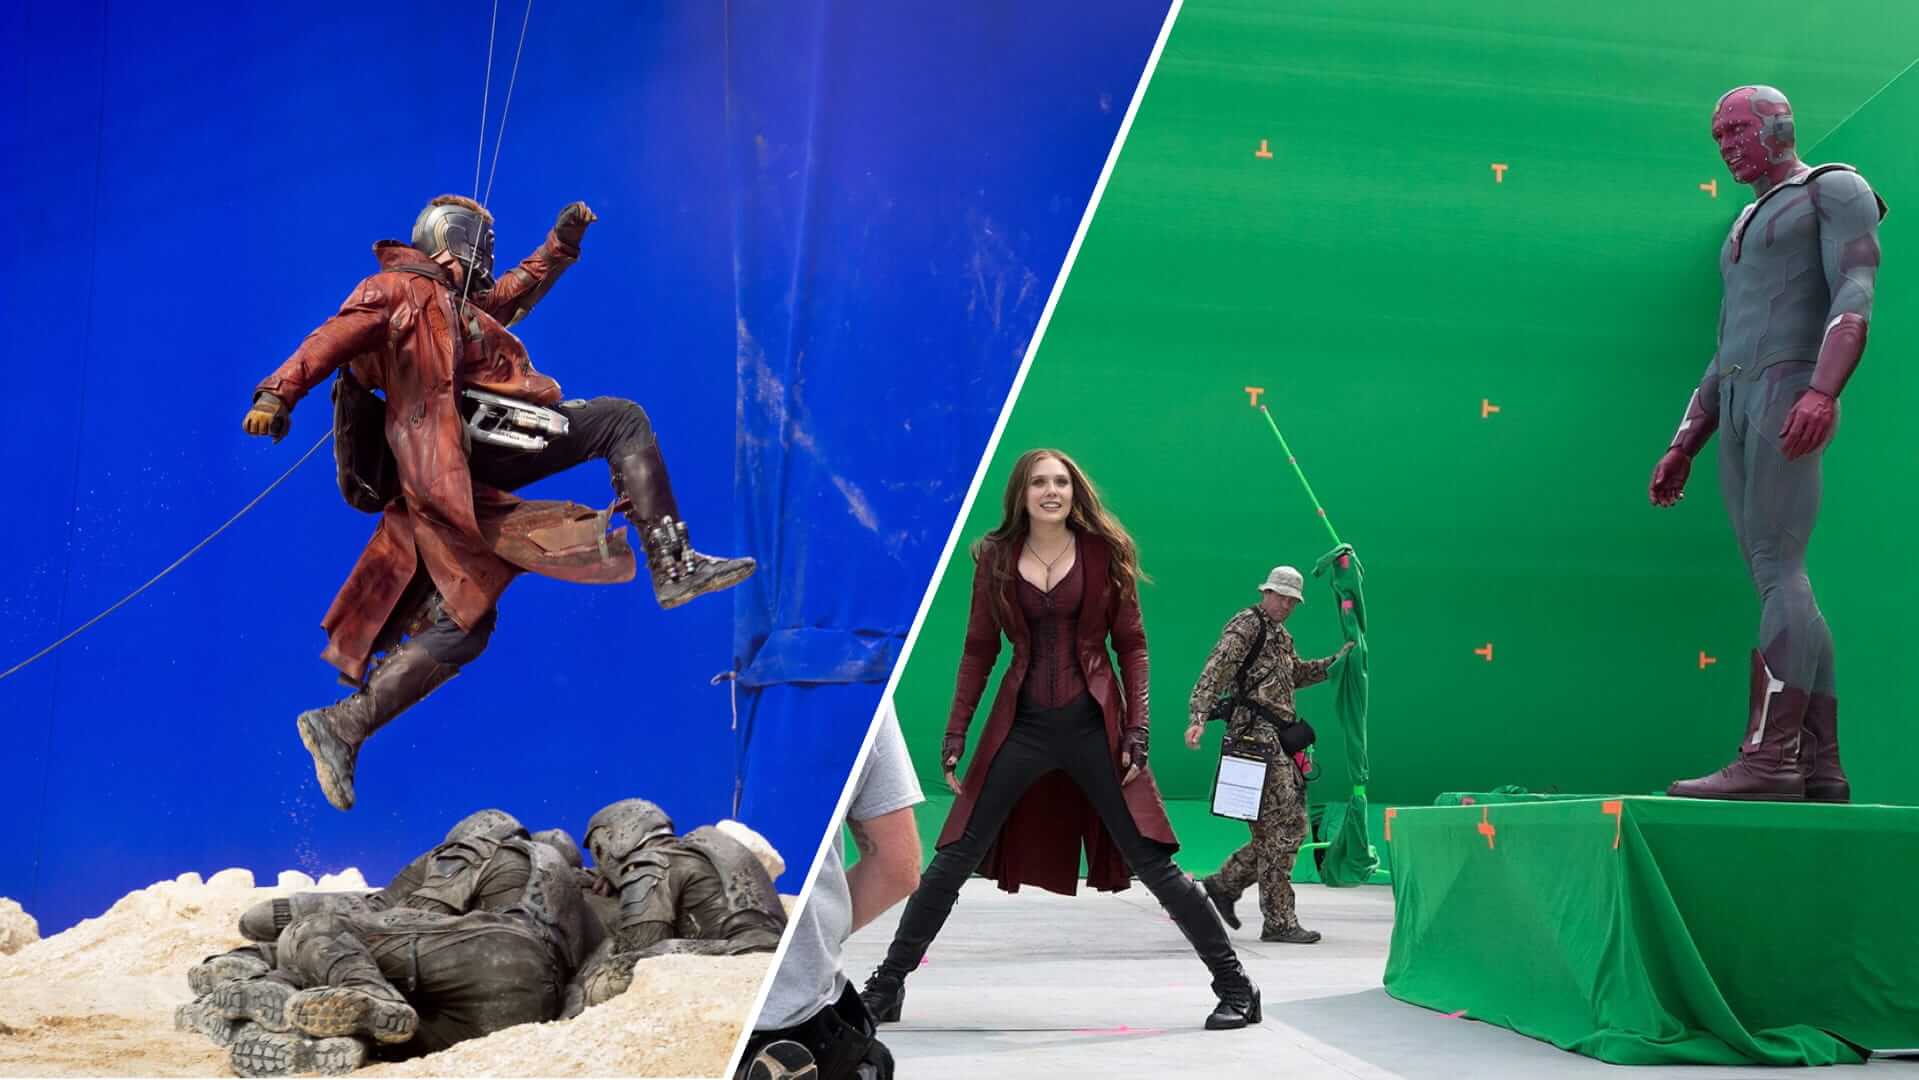 difference between blue screen and green screen